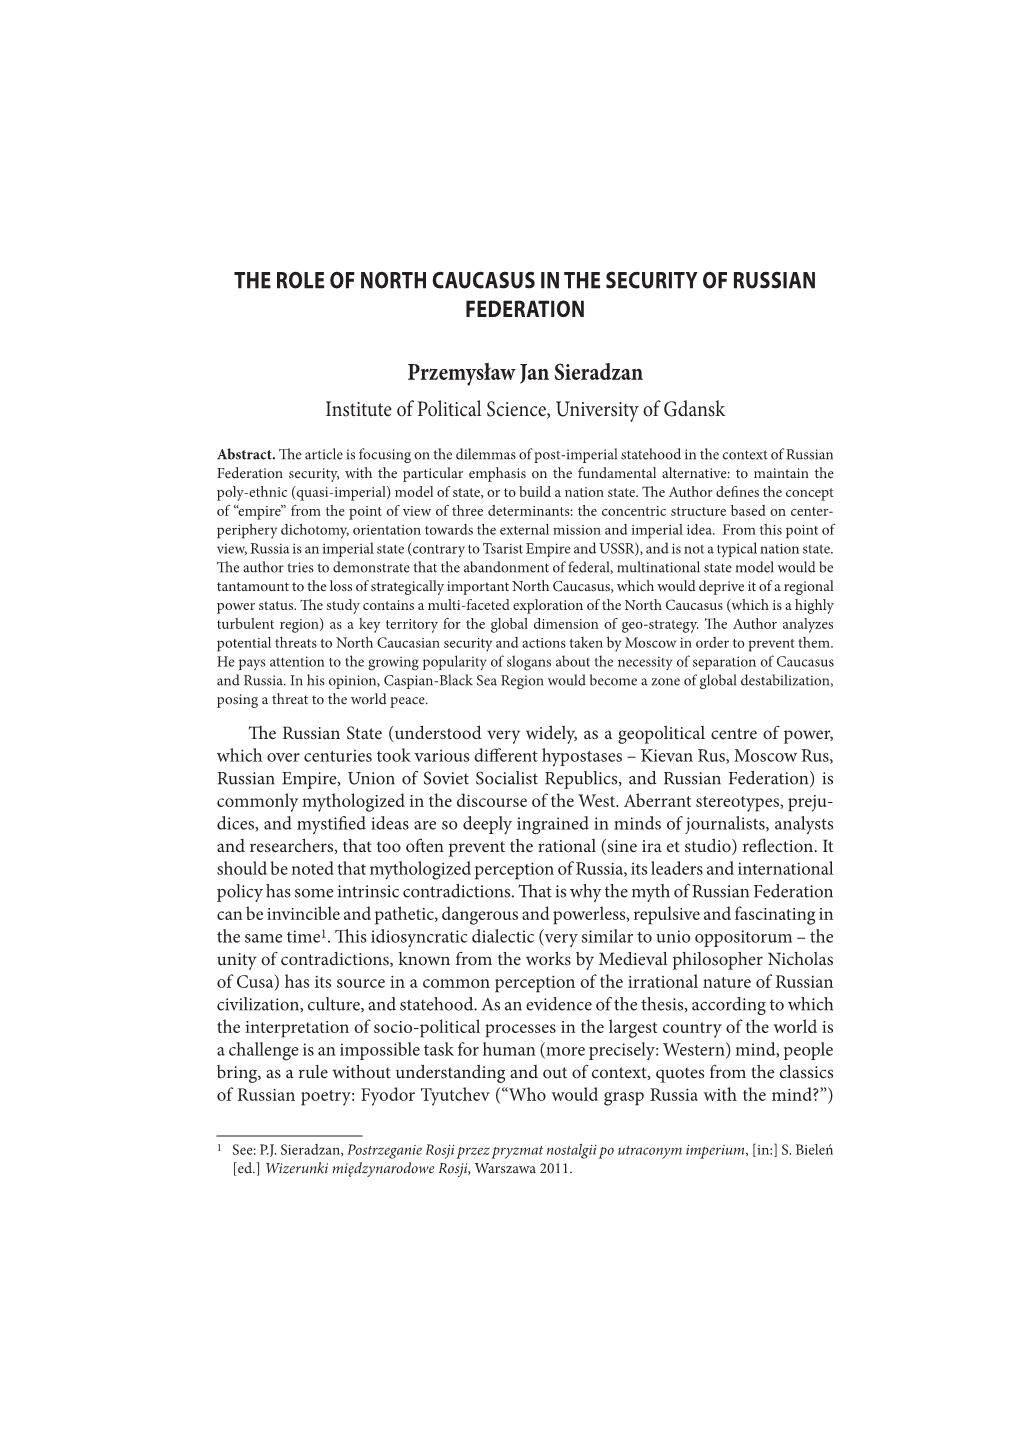 The Role of North Caucasus in the Security of Russian Federation